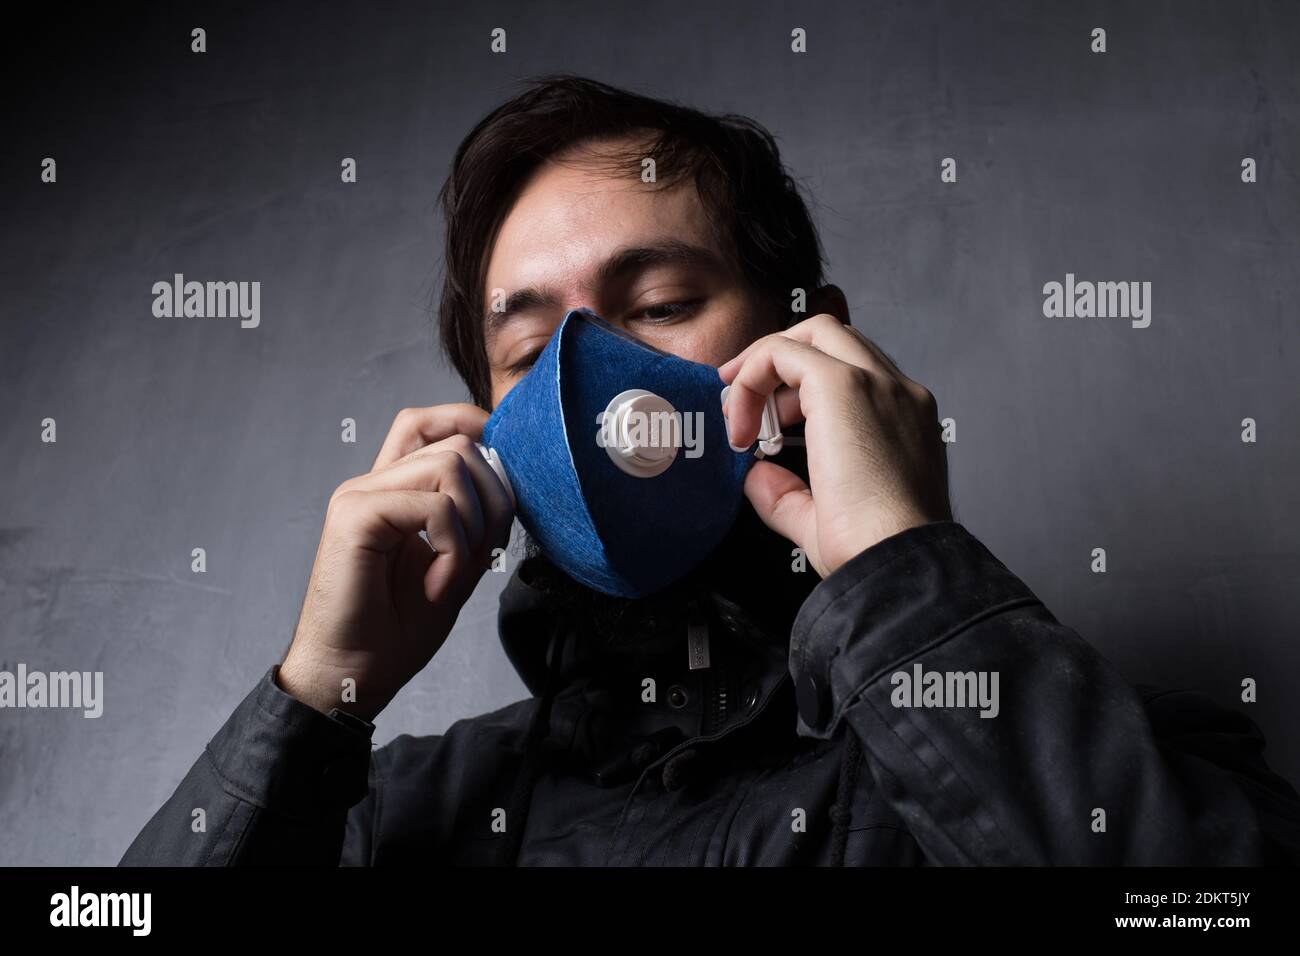 Man Wearing Pollution Mask Stock Photo